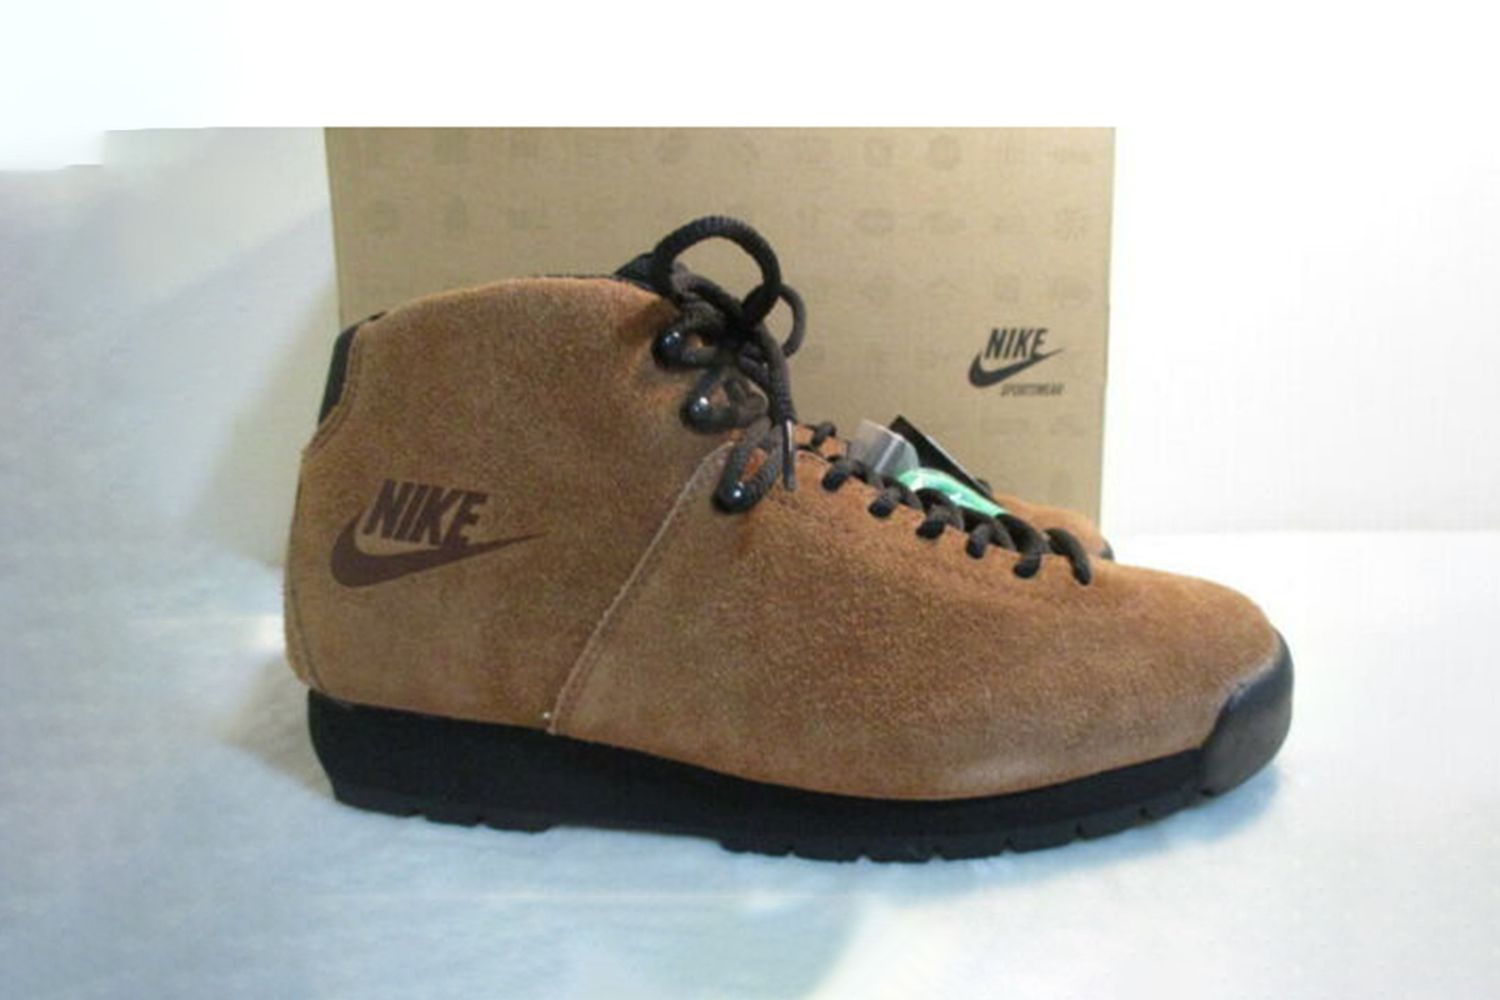 Vintage acg hiking shoes Nike ACG: 10 of the Best Pieces We Found at Resale